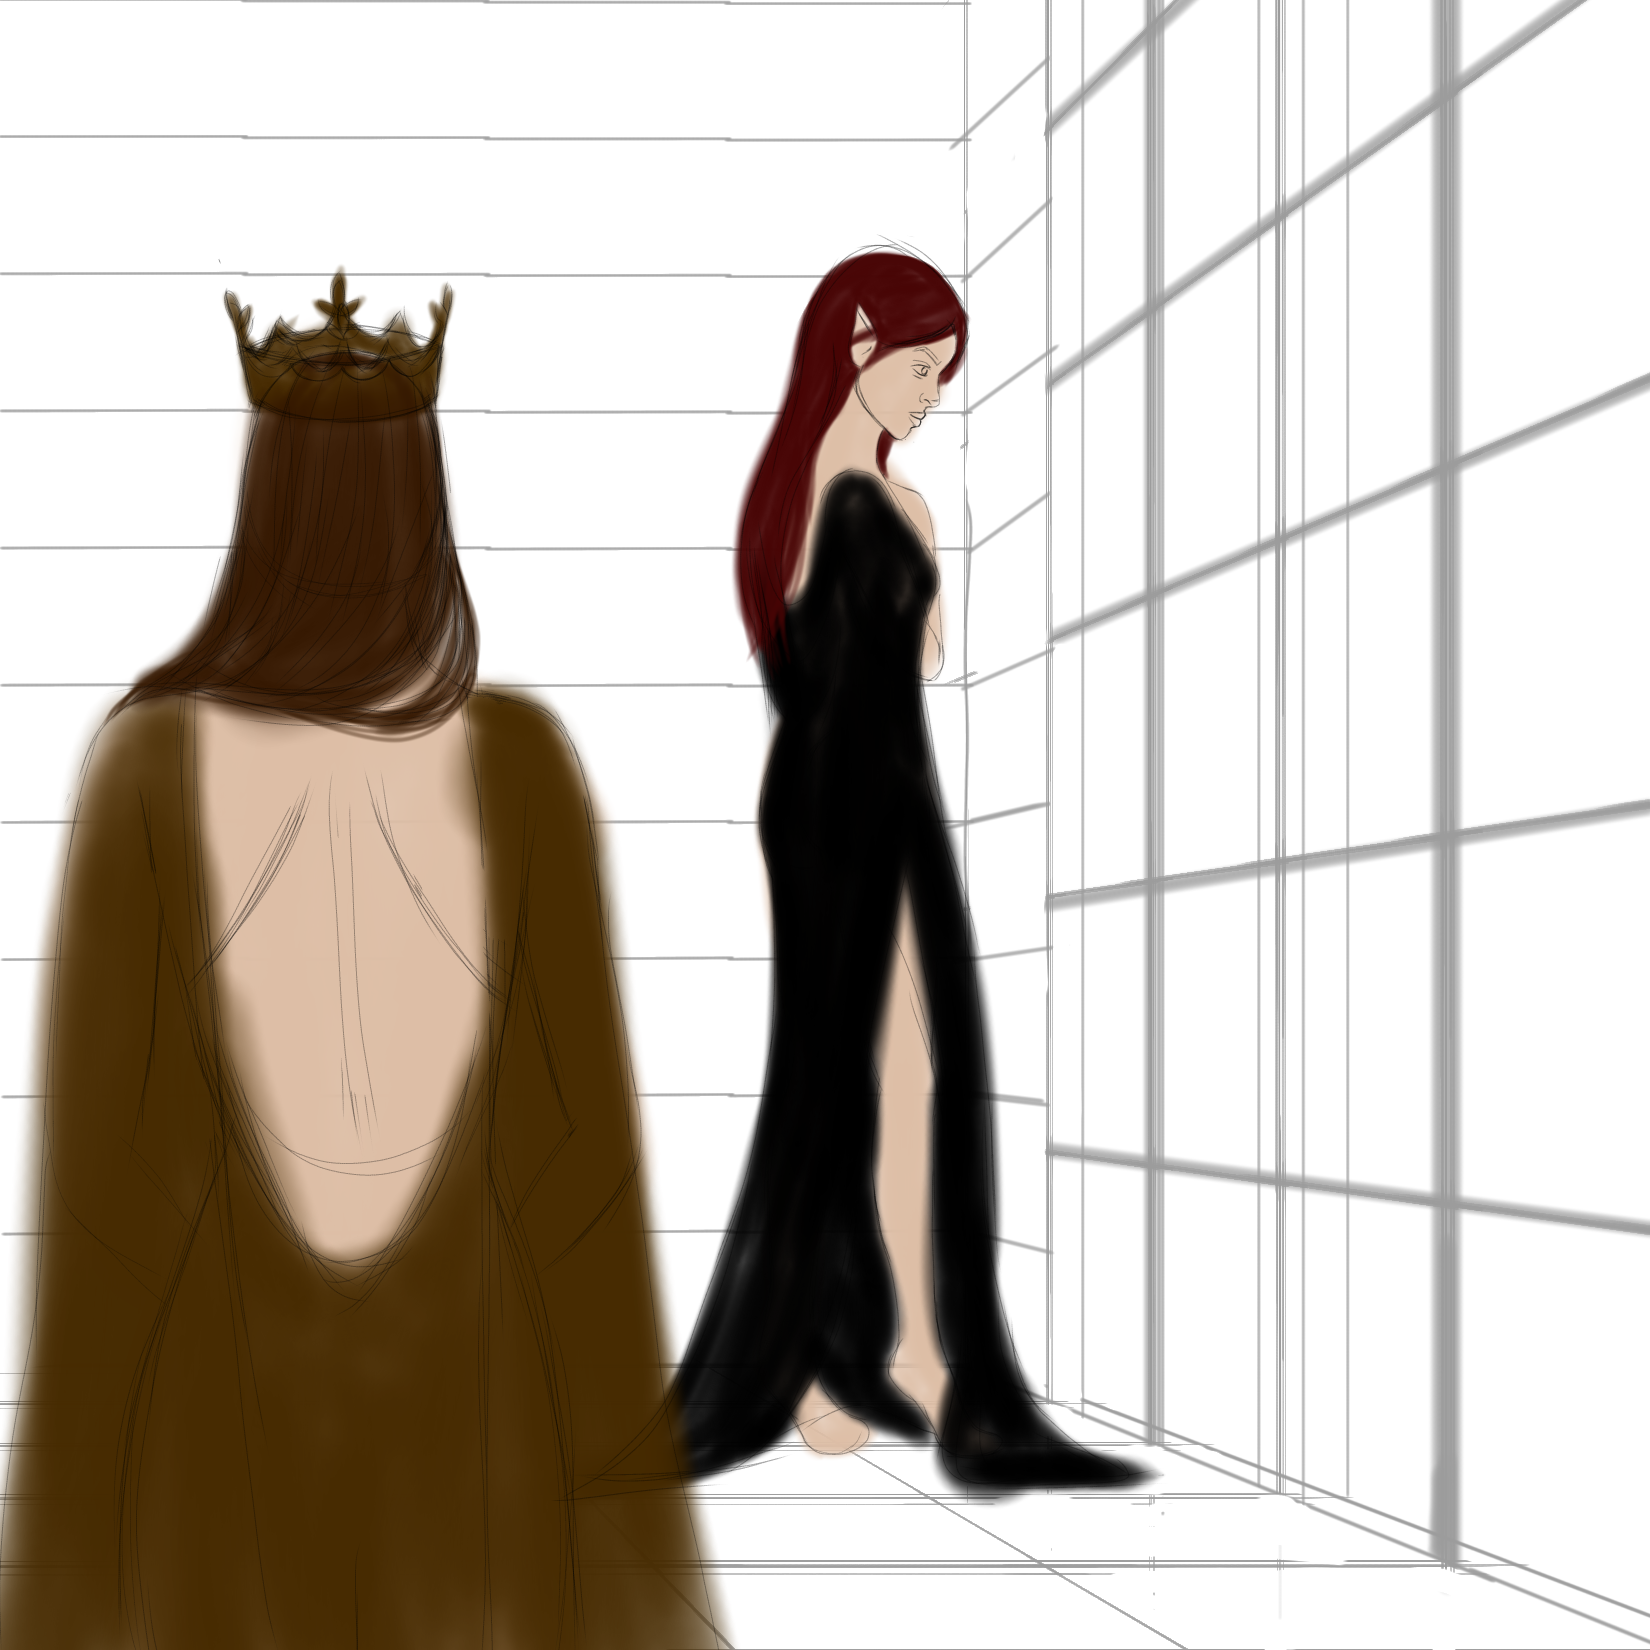 Francisftlp-Digital Drawing-The meeting with the Priestess-Step 2.png